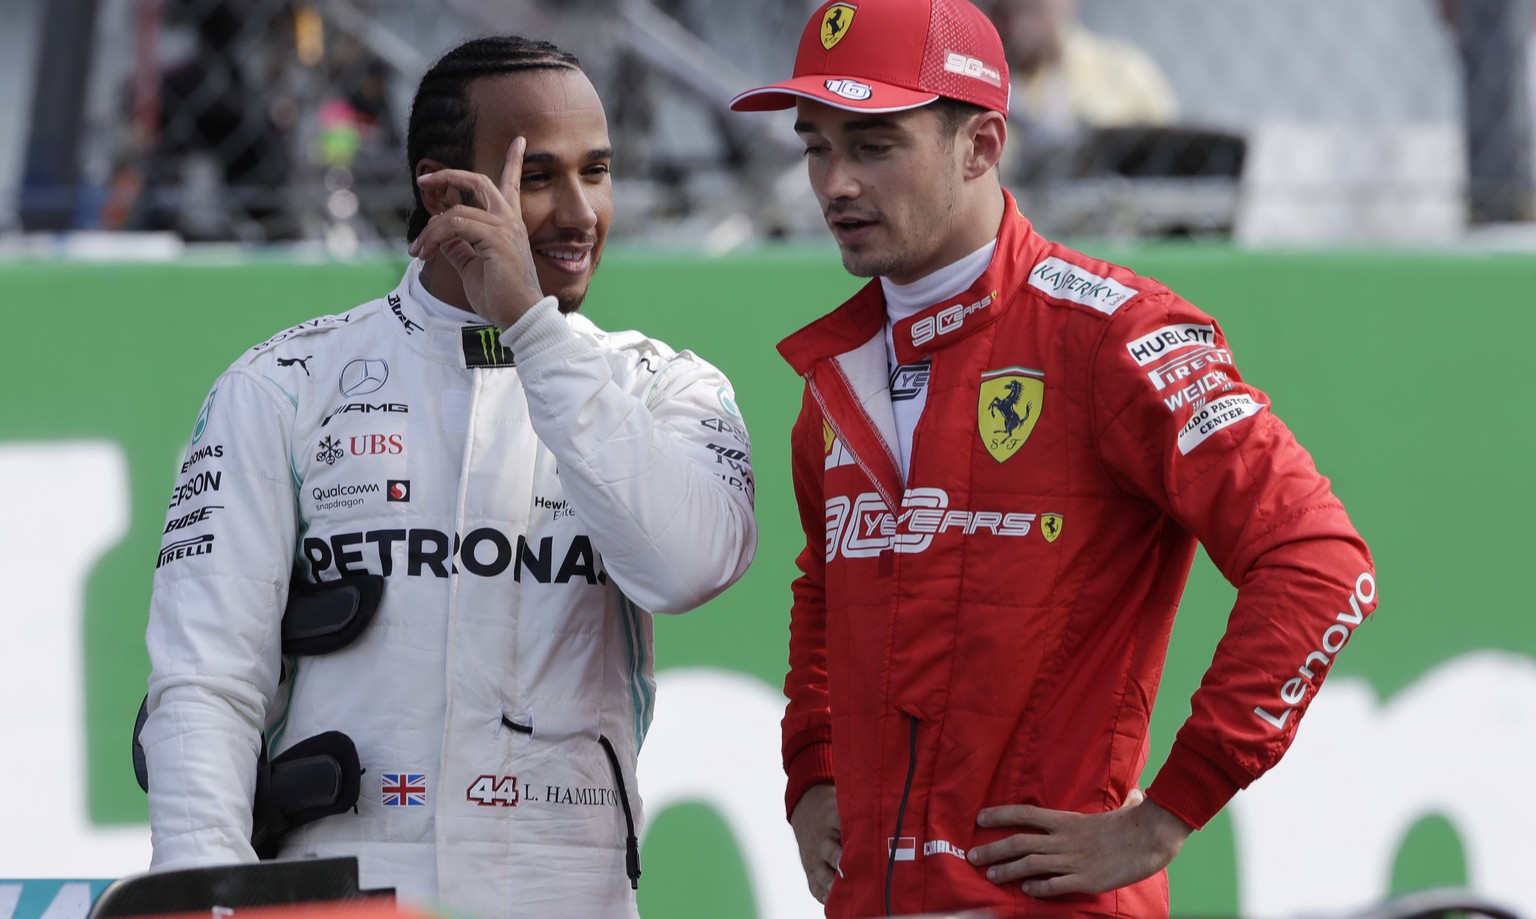 Ferrari driver Charles Leclerc of Monaco, right, talks with Mercedes driver Lewis Hamilton of Britain after the qualifying session at the Monza racetrack, in Monza, Italy, Saturday, Sept. 7, 2019. The ...